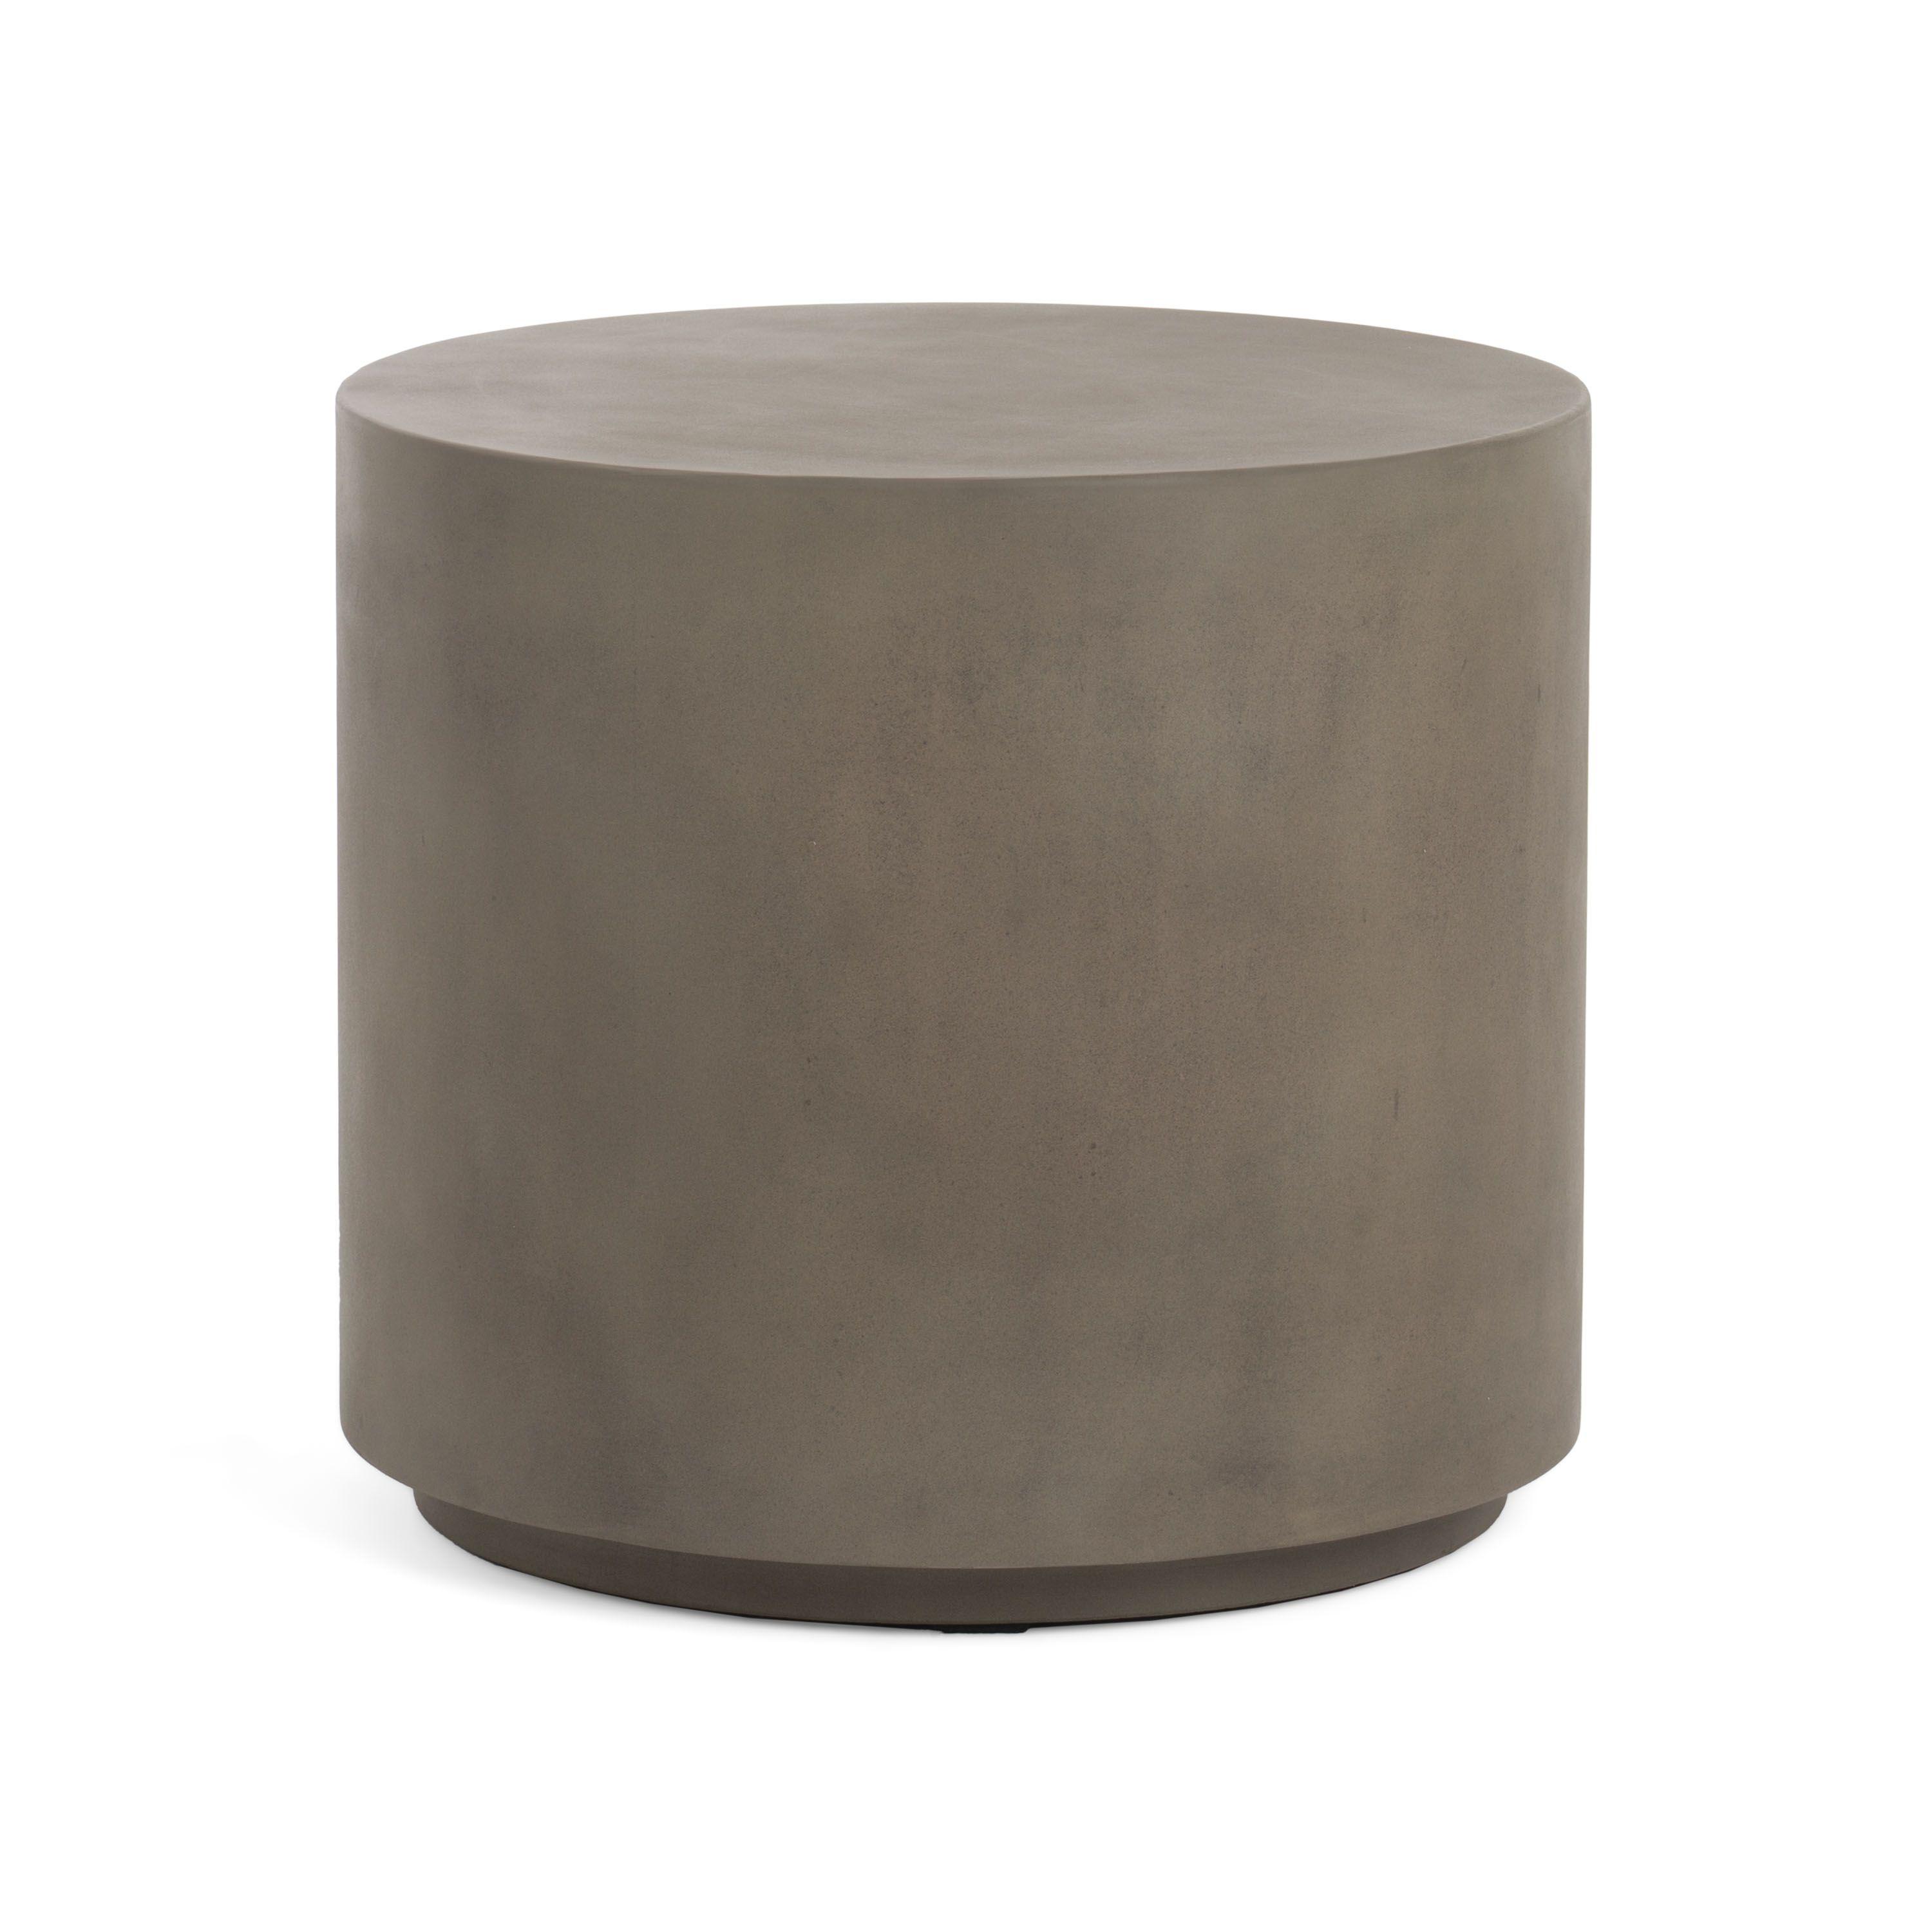 Modern End Table Modrest Morley Round End Table VGGRMORLEY-END VGGRMORLEY-END in Gray Fabric